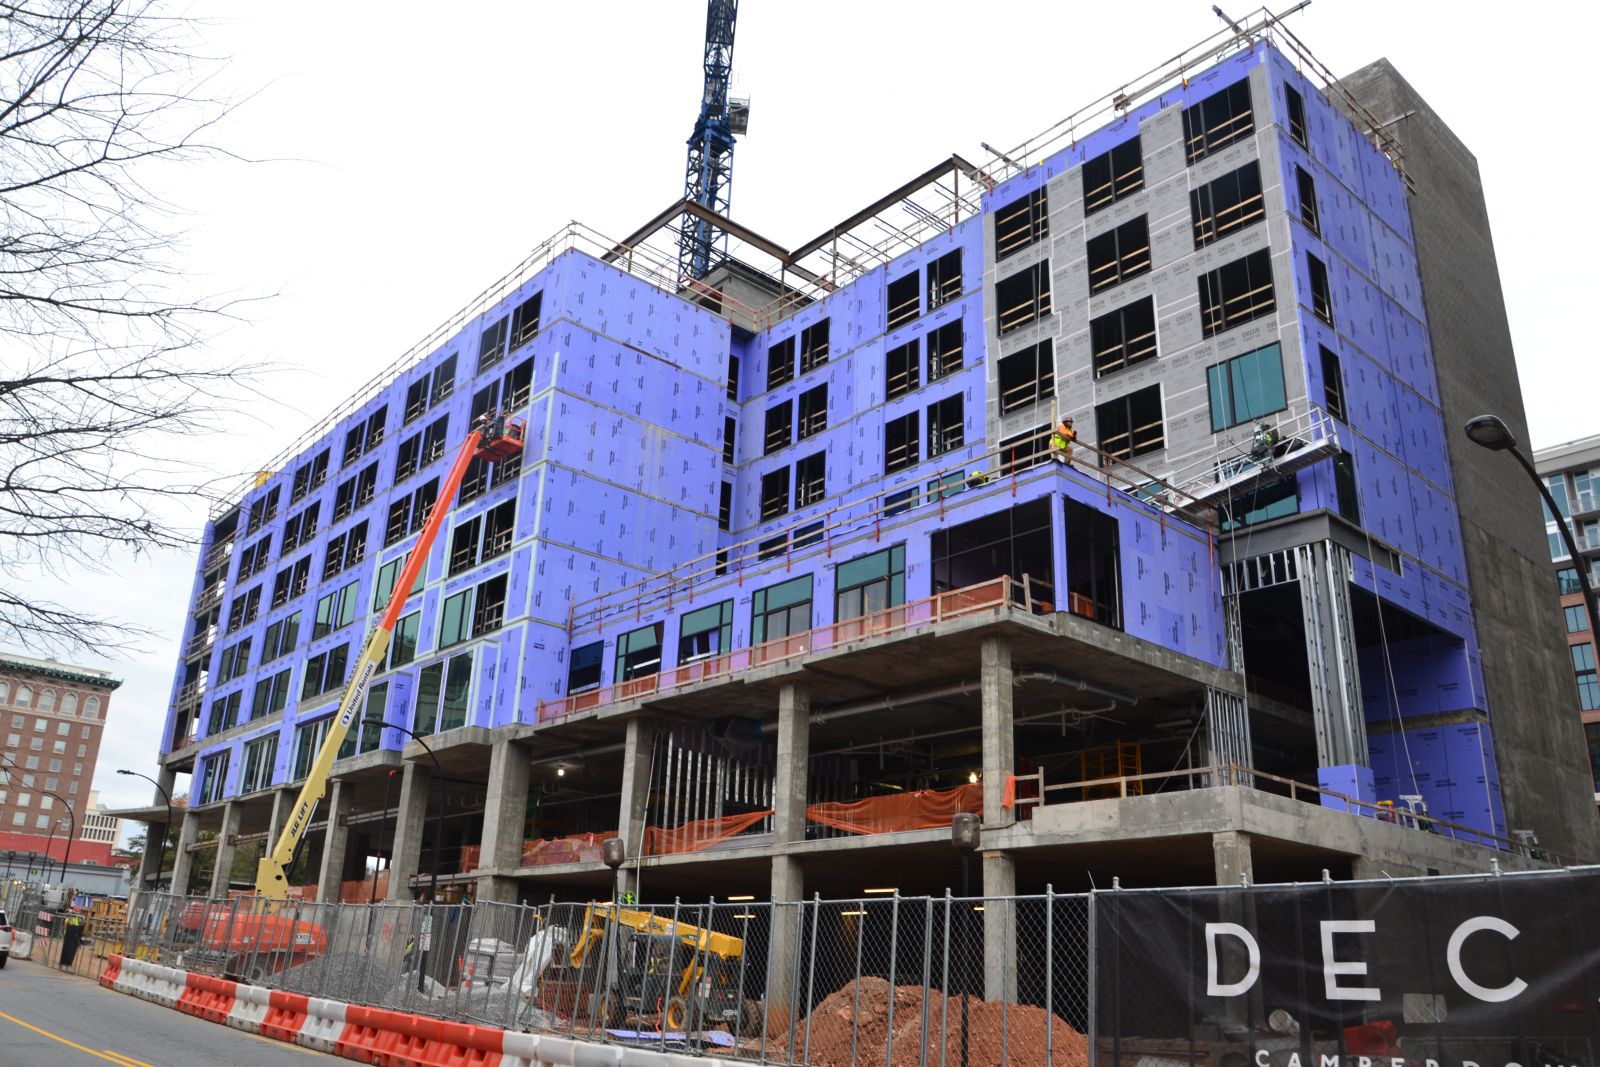 The pandemic has not slowed construction of the new AC hotel downtown but Auro hotels has not decided what opening plans will be. (Photo/Ross Norton)